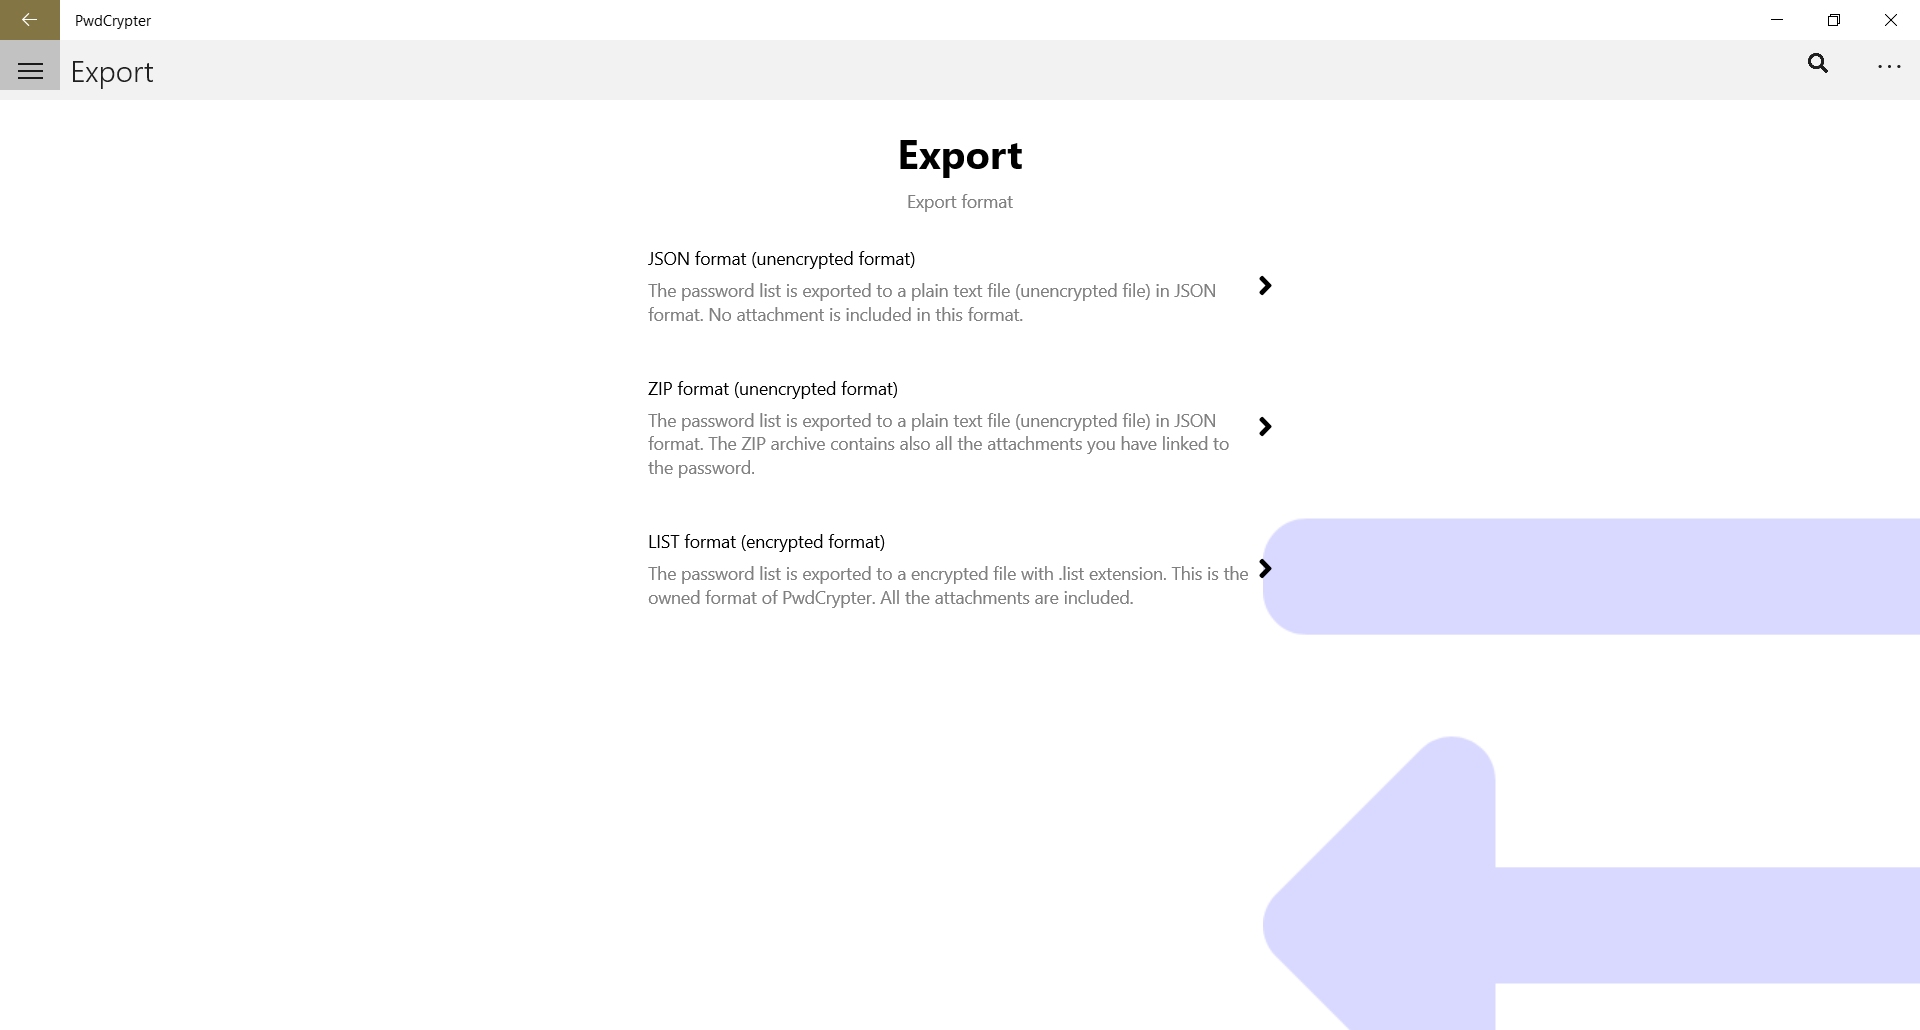 Export page. There are three file formats: JSON, ZIP and LIST (the proprietary file format of PwdCrypter)